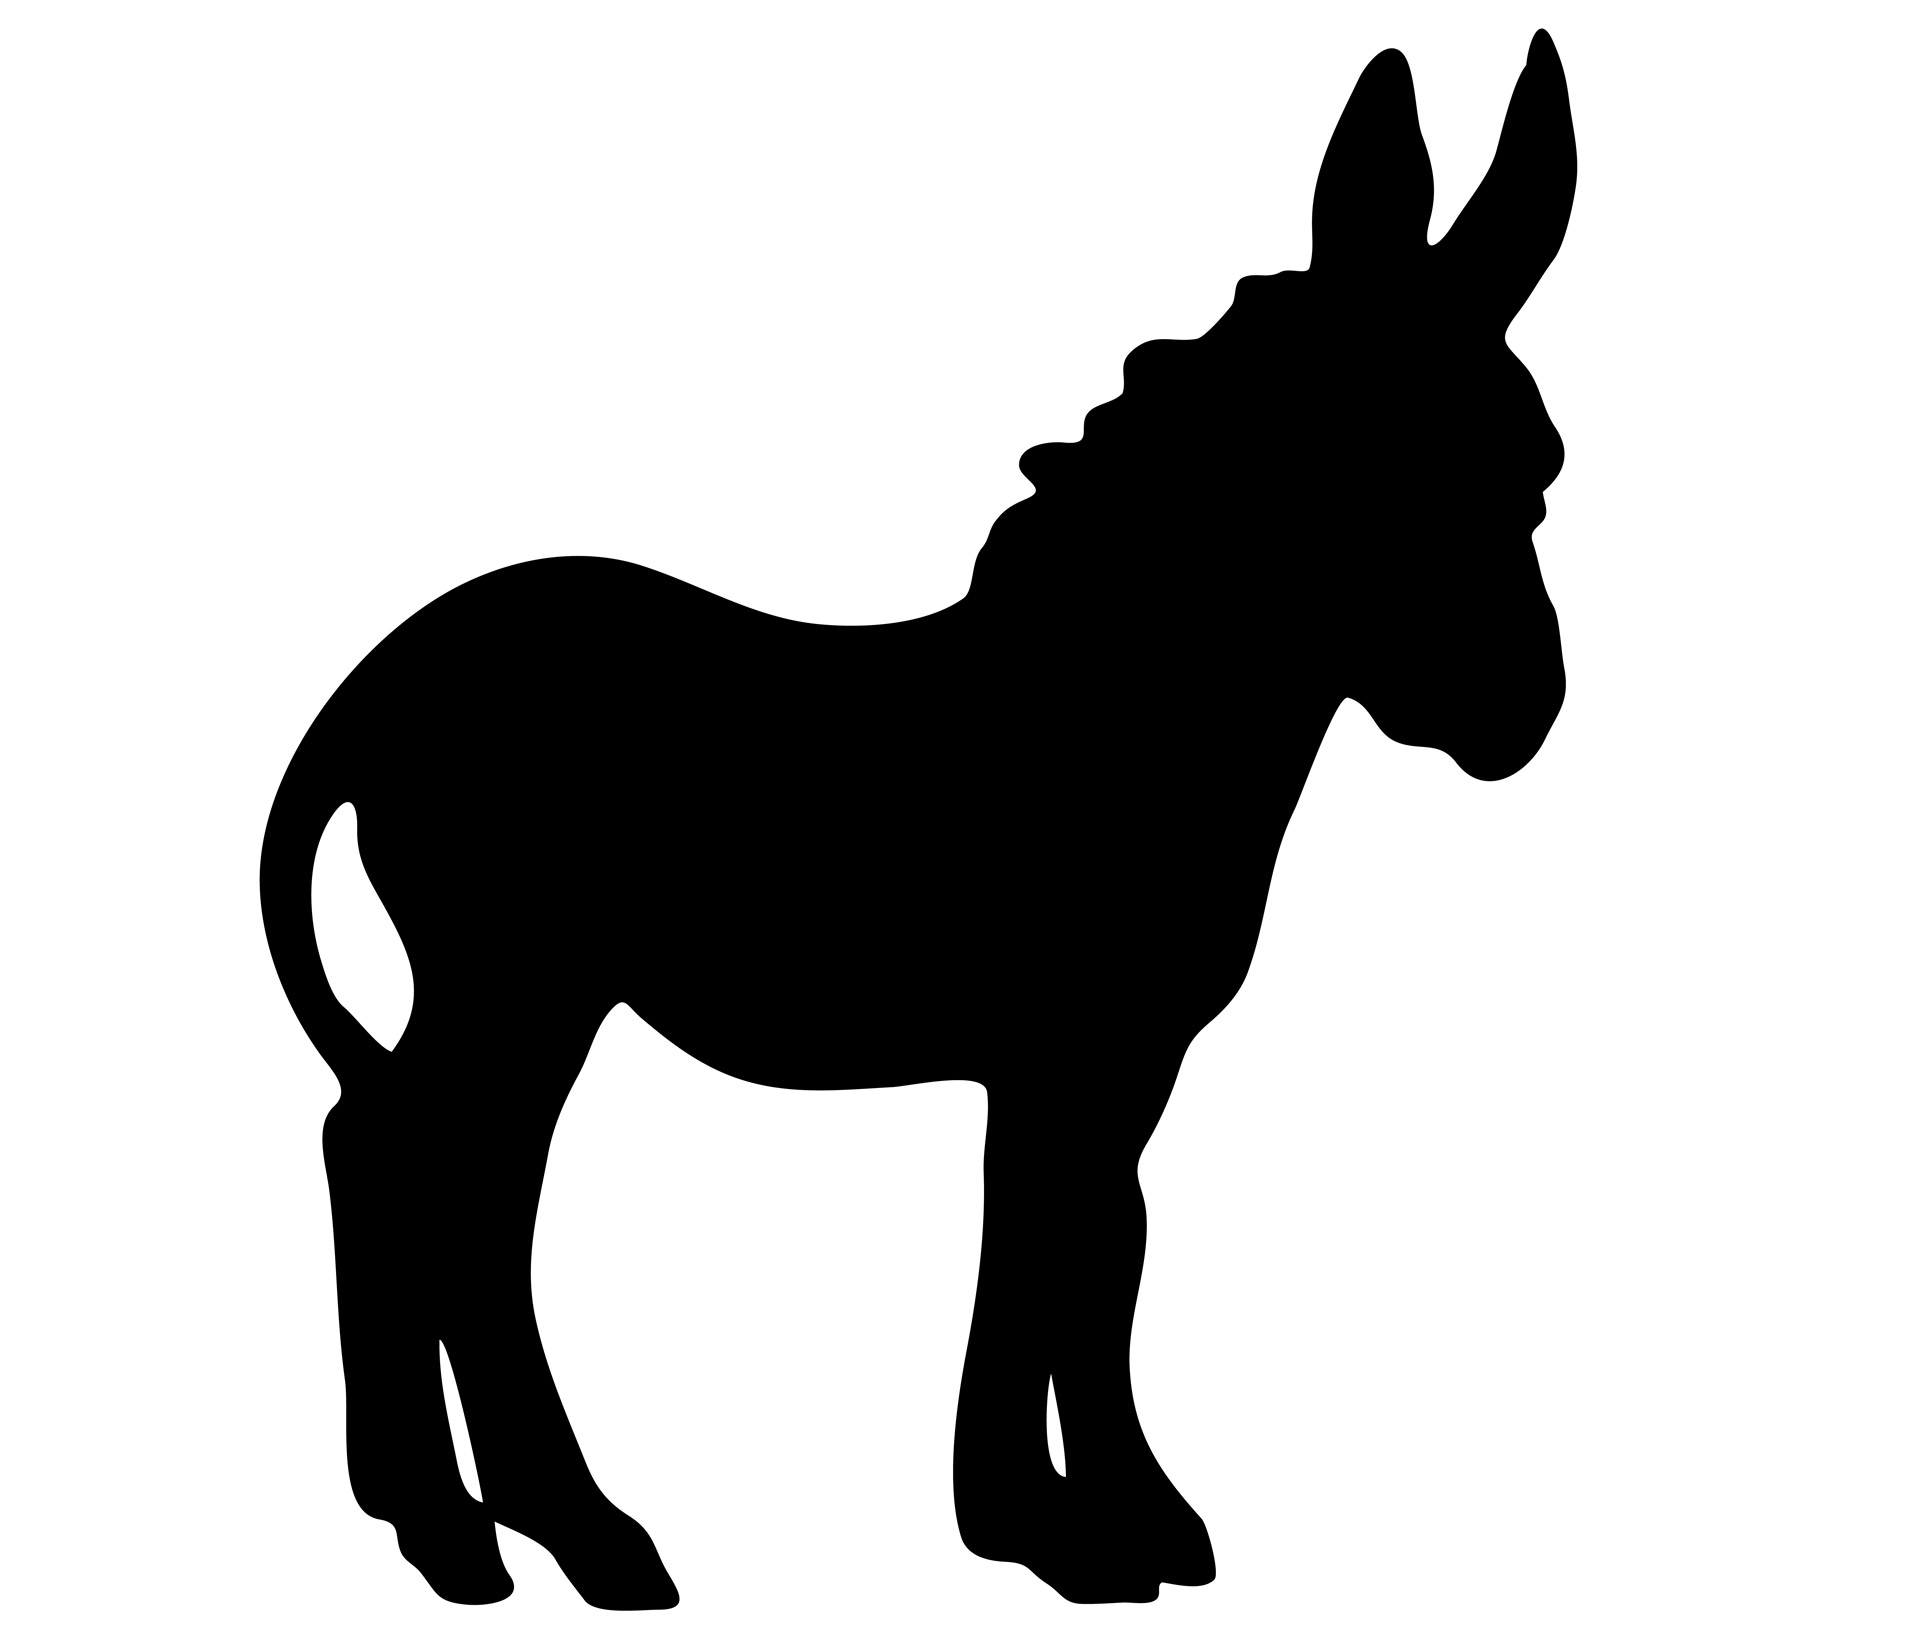 Black silhouette of a cute donkey